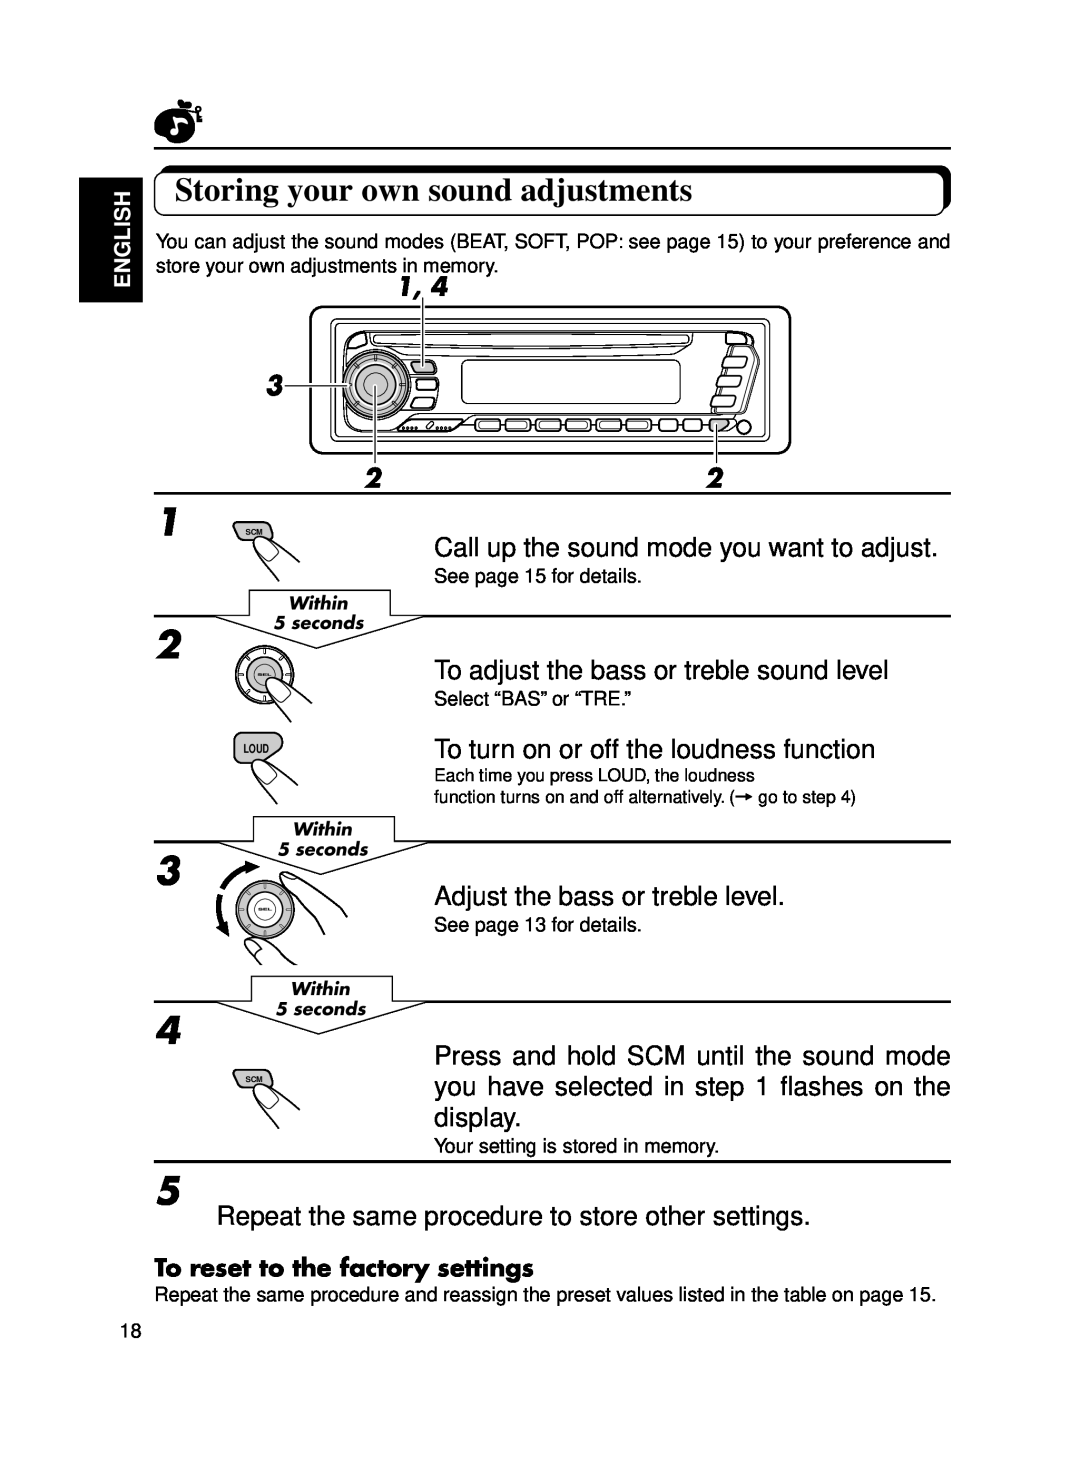 JVC KD-SX650 manual Storing your own sound adjustments, To turn on or off the loudness function 